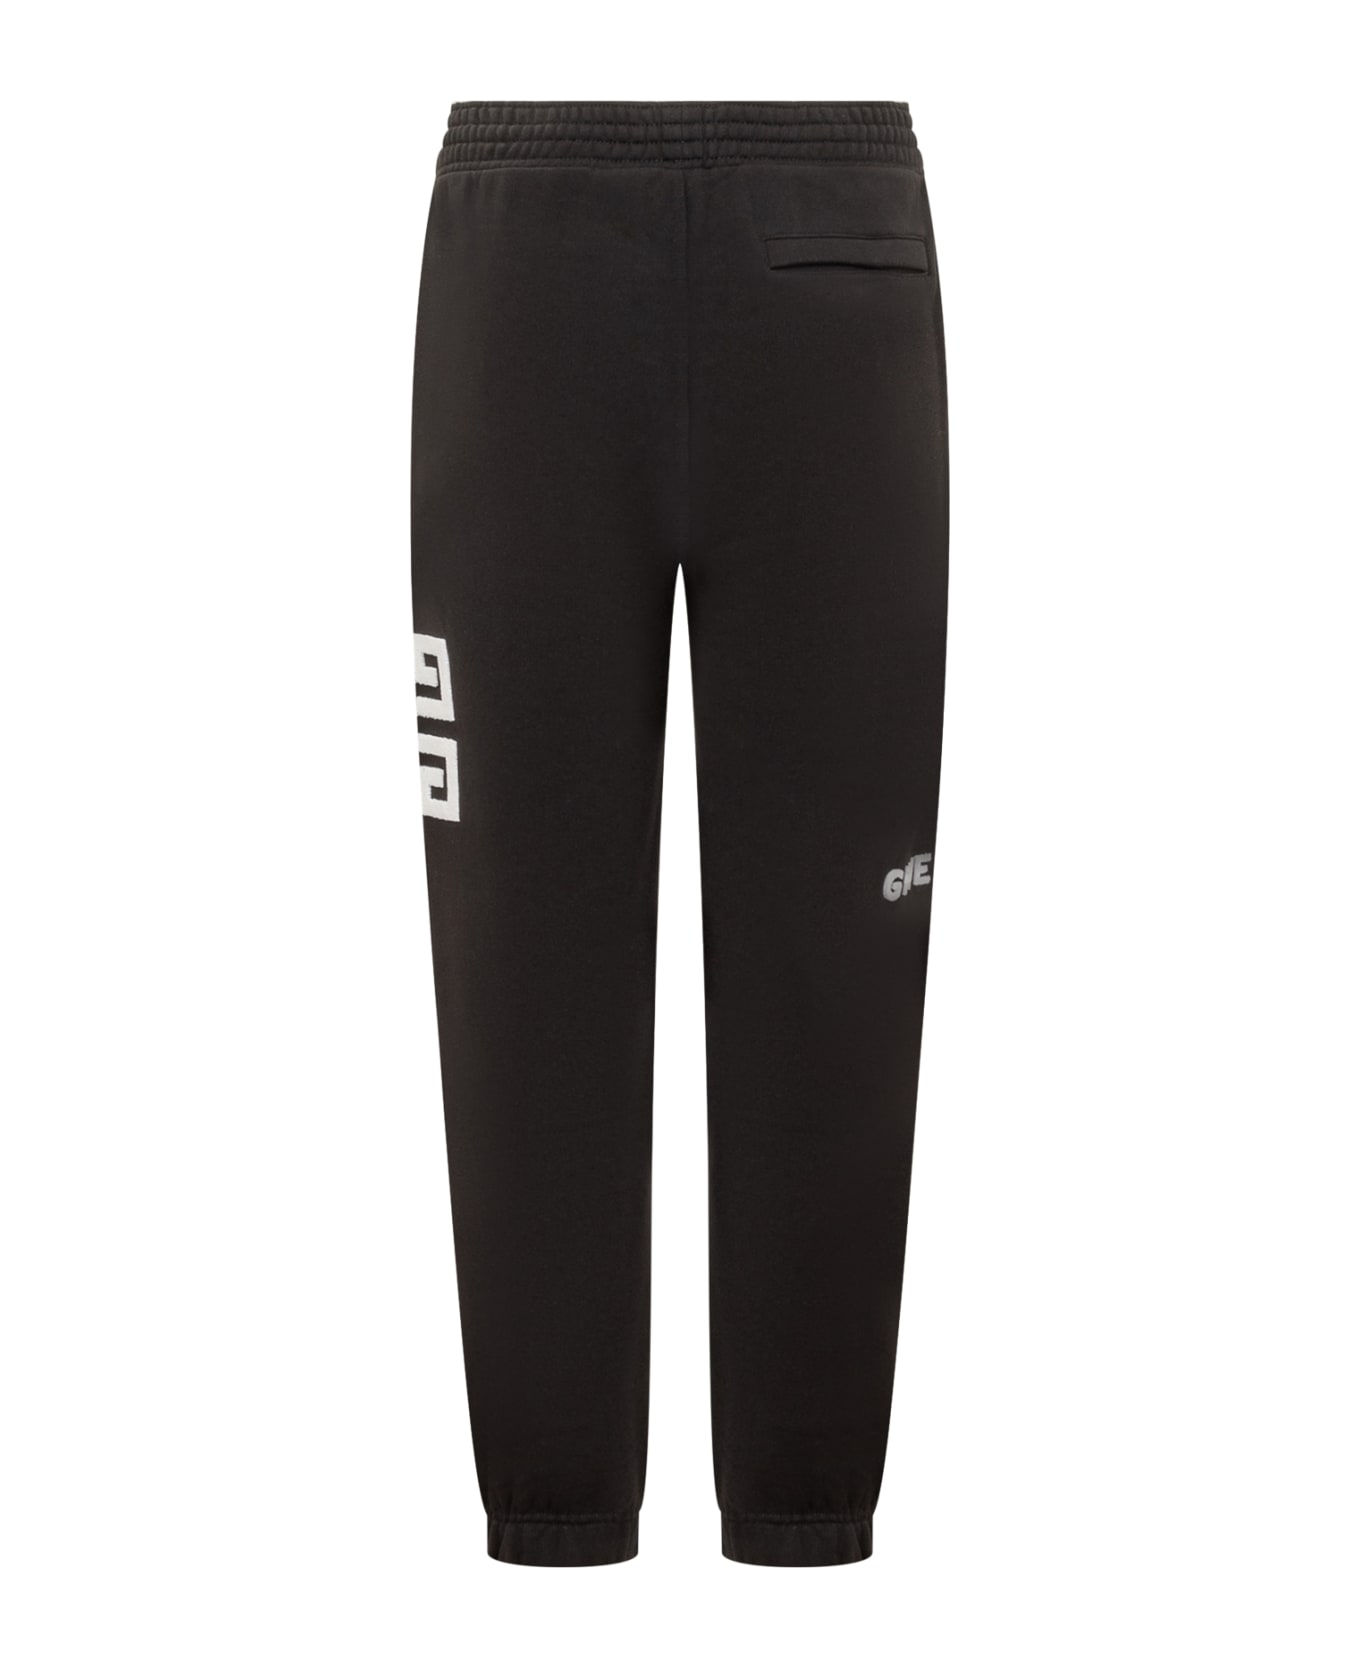 Givenchy Jogger Trousers - BLACK